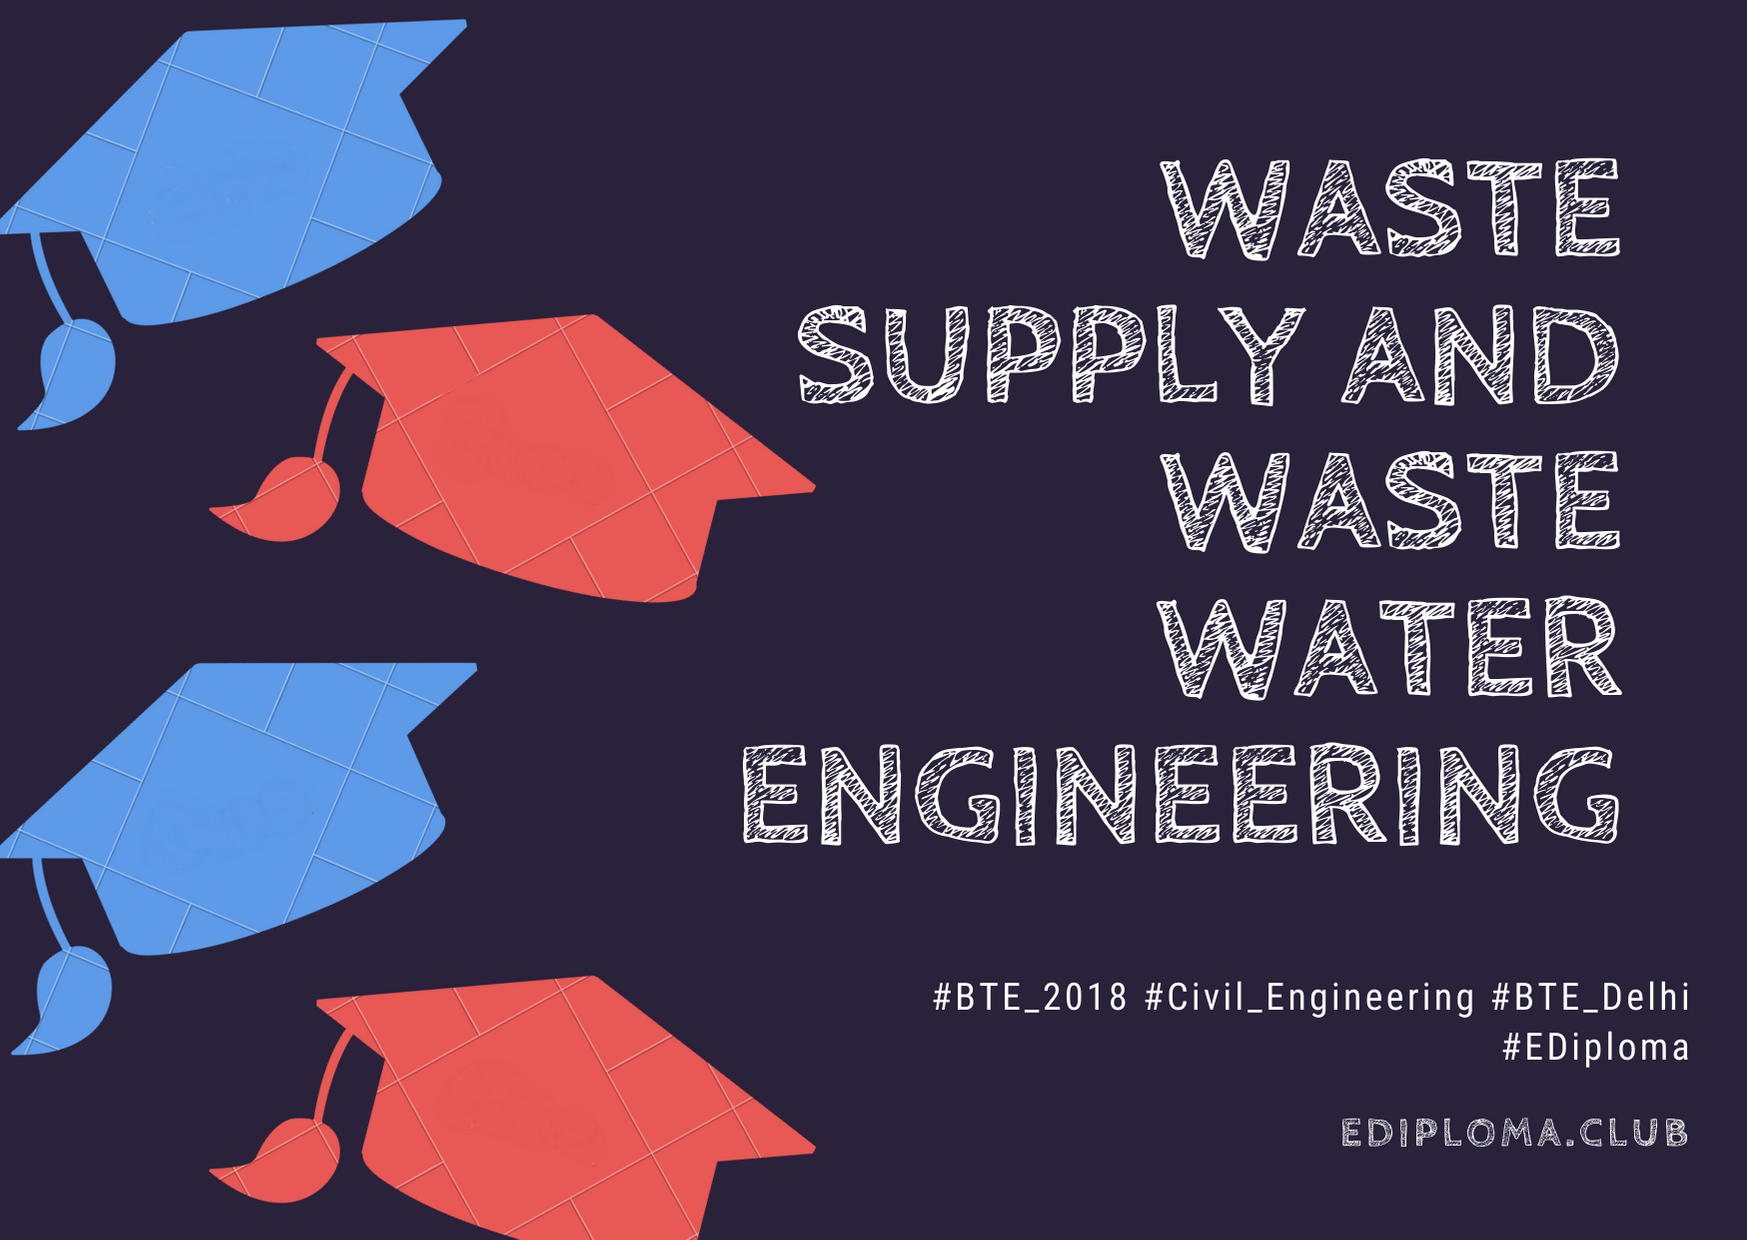 BTE Question Paper of Waste supply and wastewater Engineering 2018